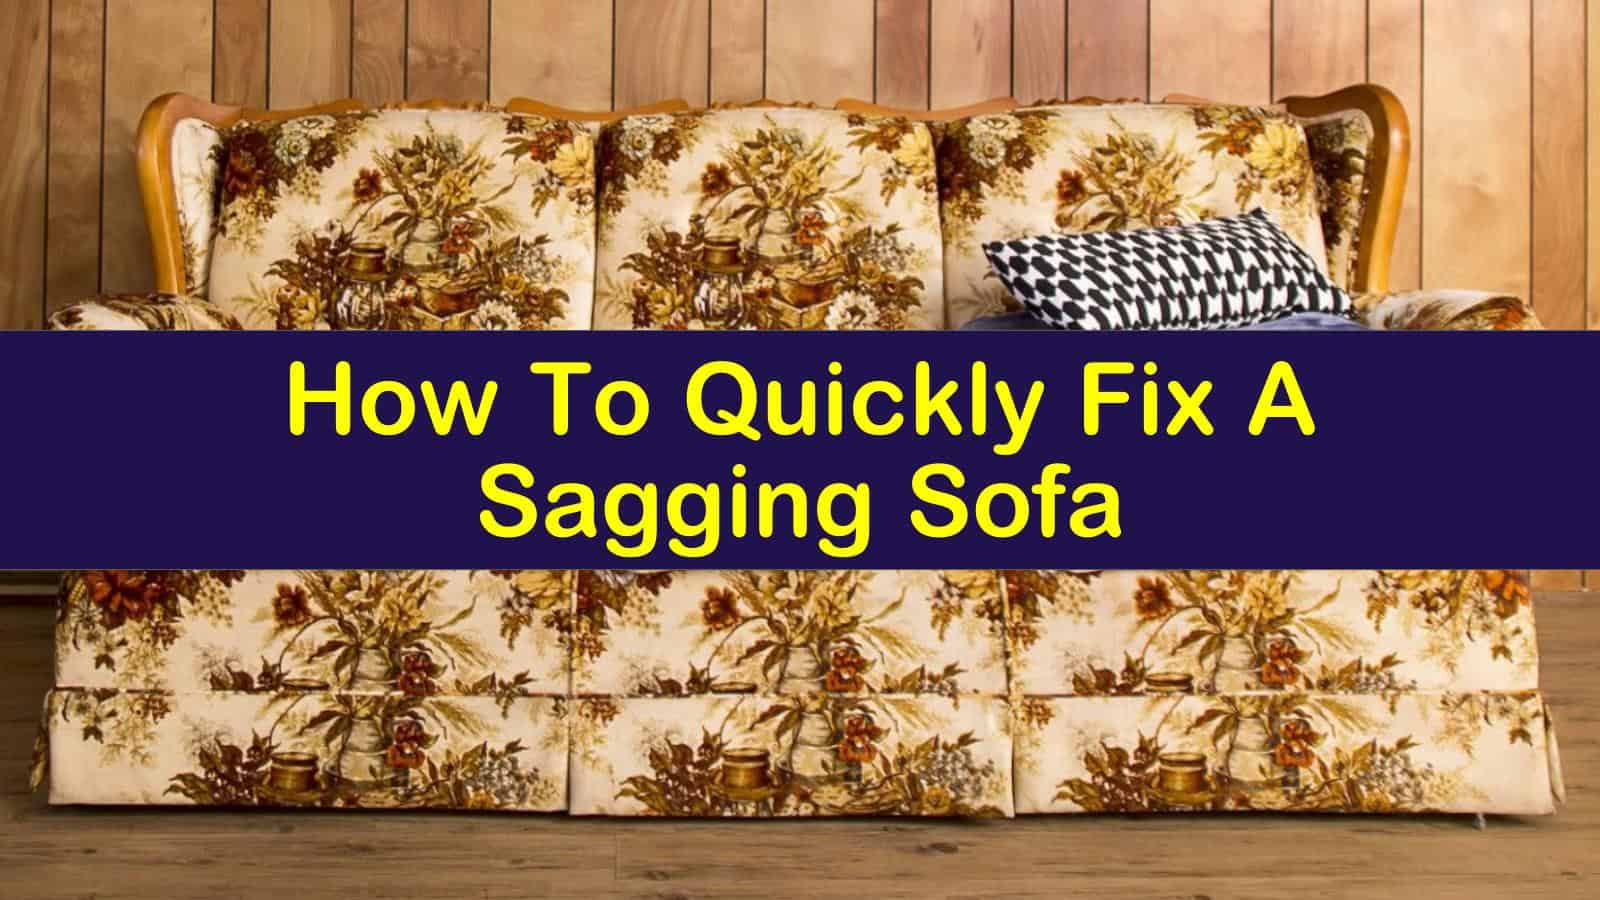 How To Quickly Fix A Sagging Sofa